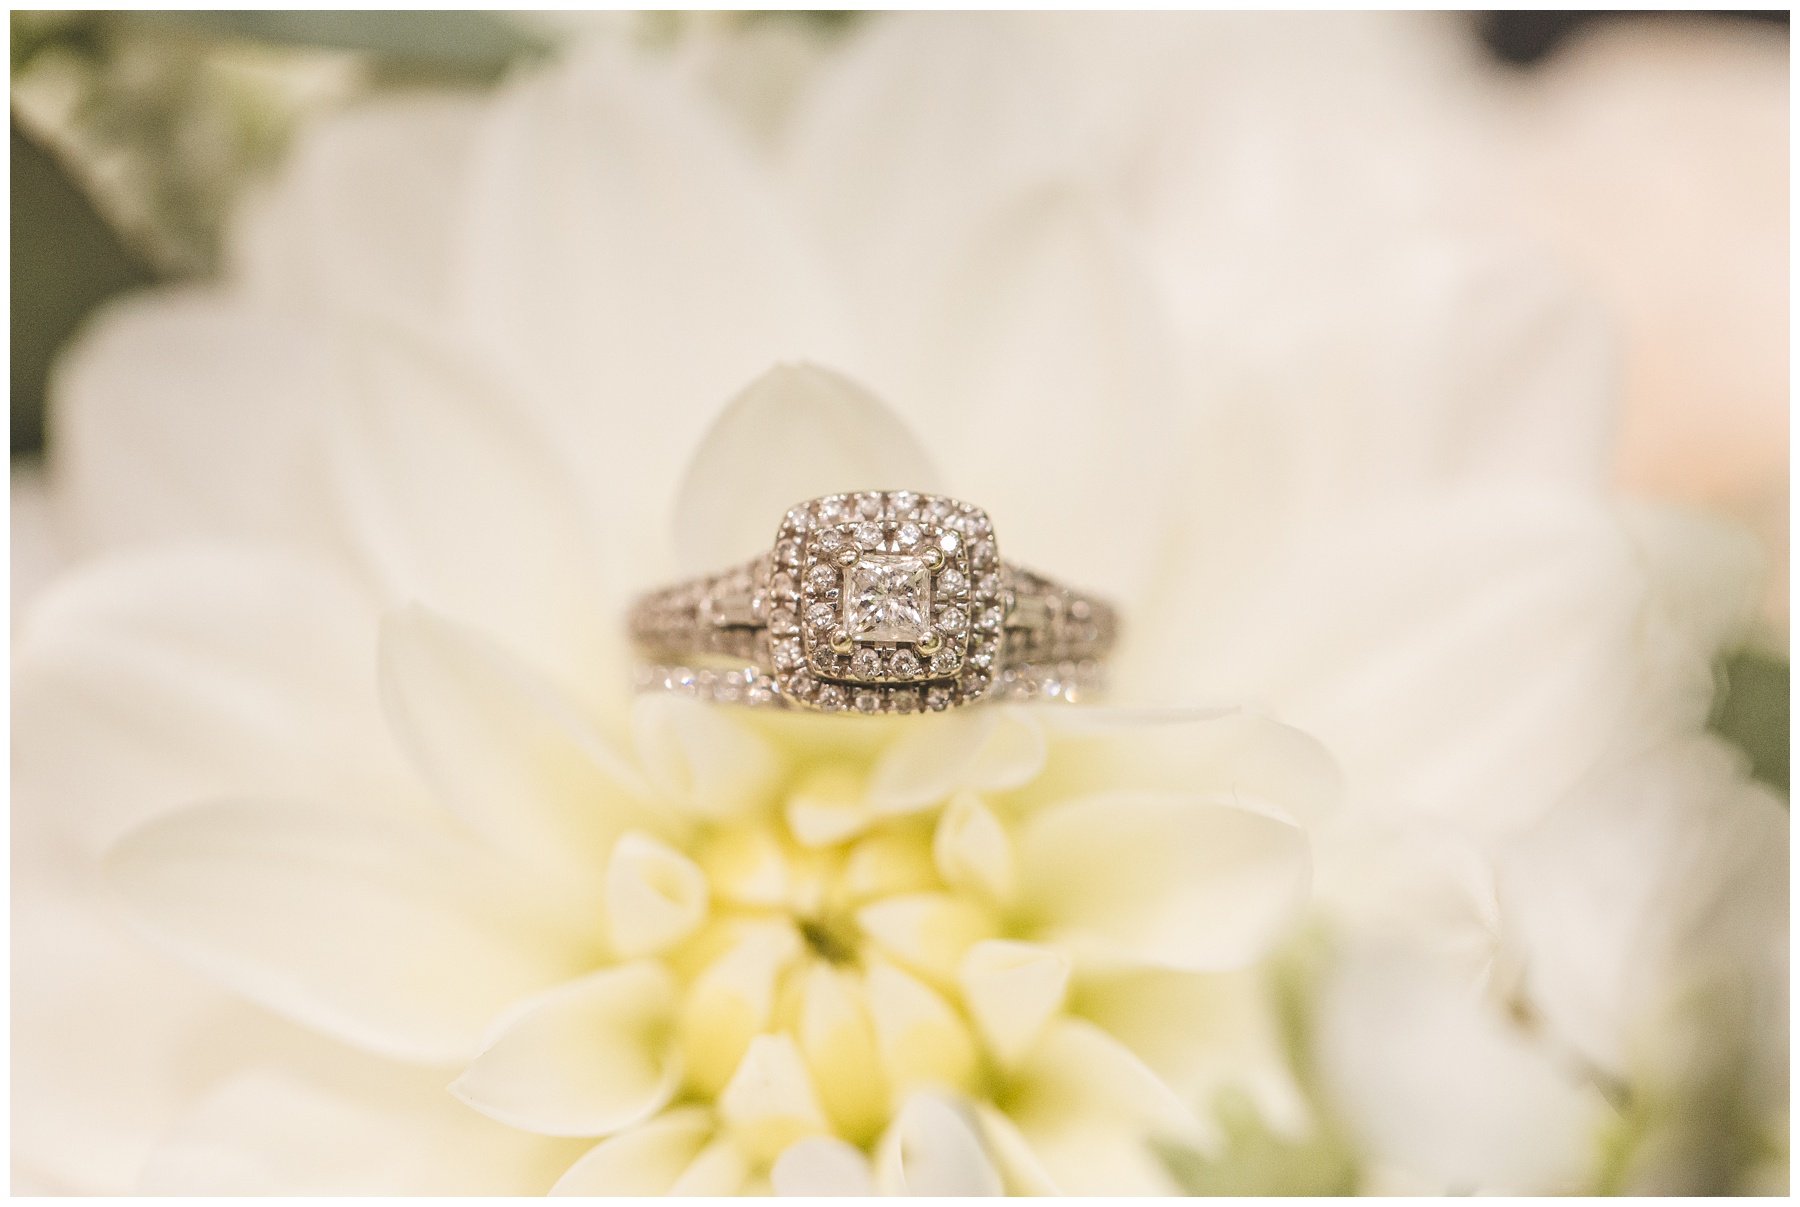 Cloudy wedding day wedding ring in flowers photographed by Miranda Renee Photography